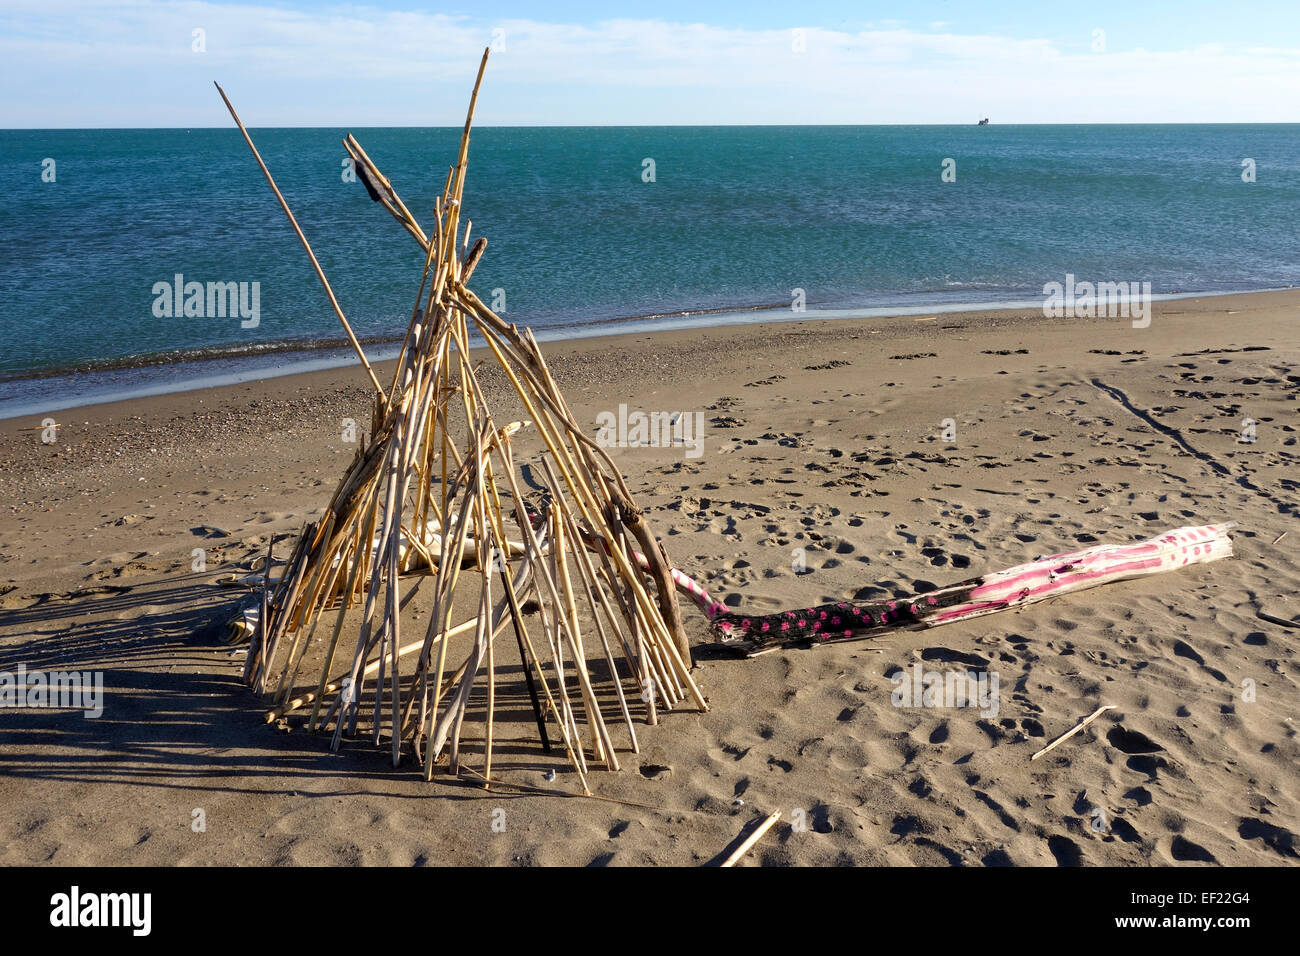 Tipi, tepee, teepee build from river cane and painted log left behind at beach of Malaga, Spain. Stock Photo